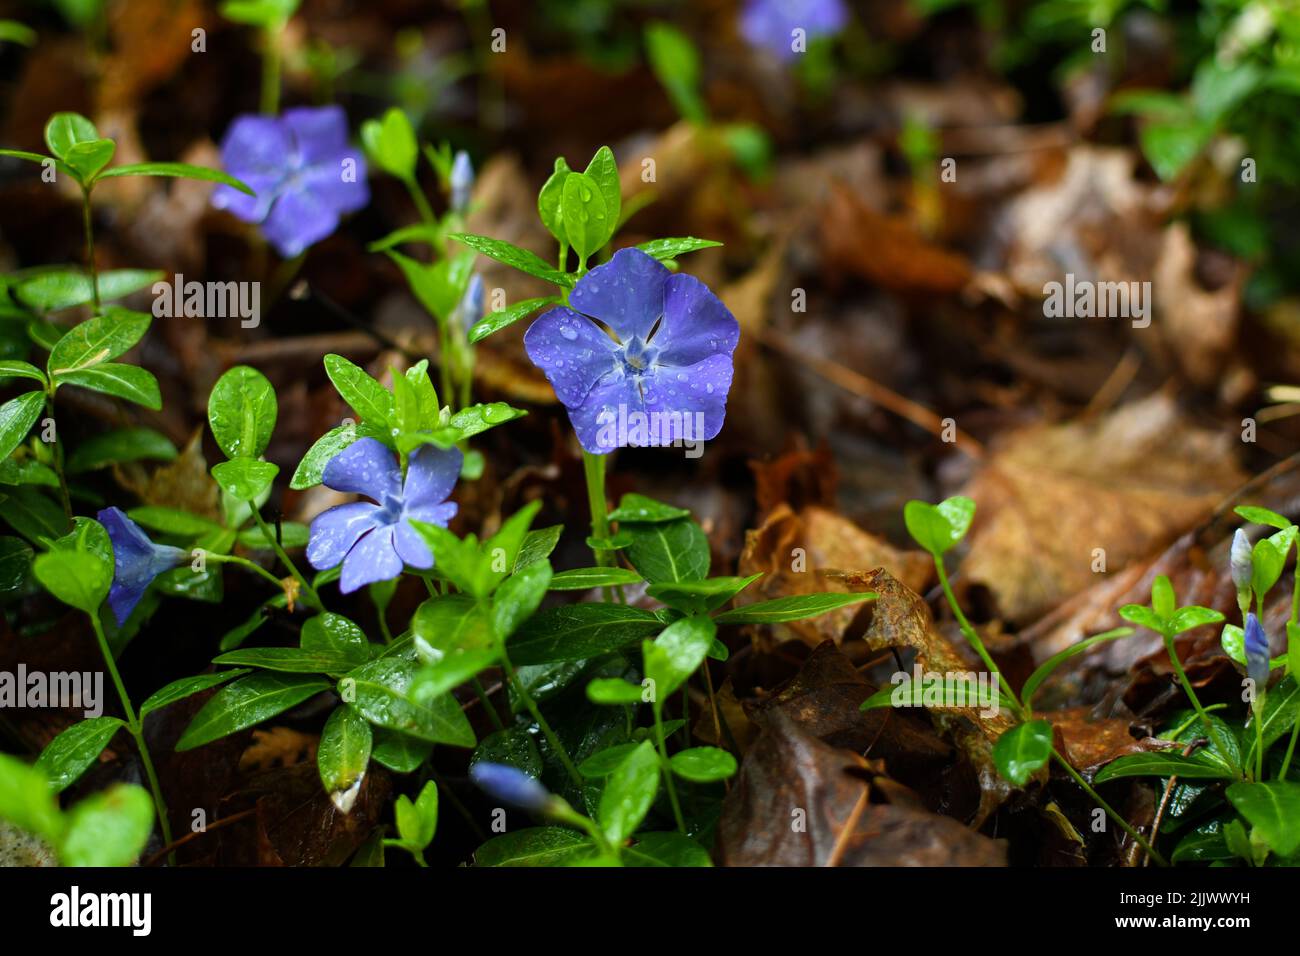 Common periwinkle after fresh rain Stock Photo